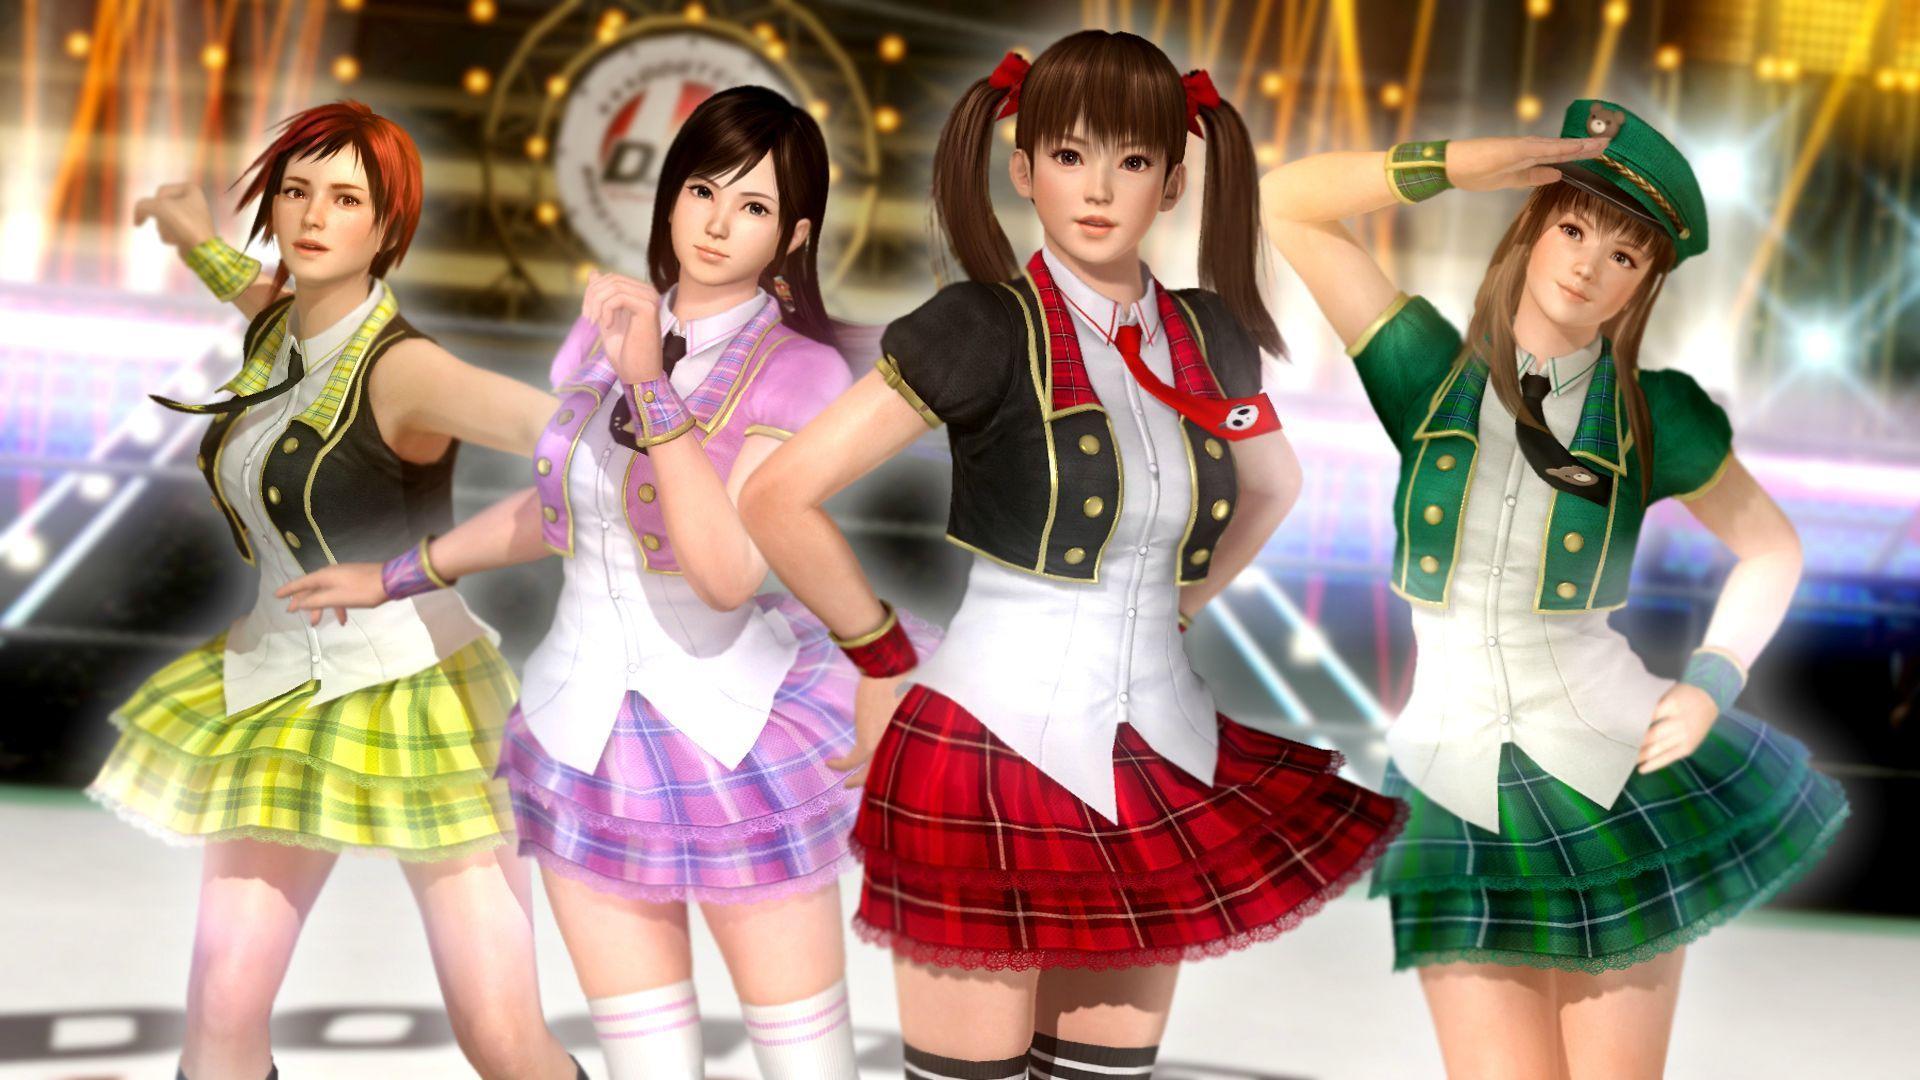 Free Amazing Dead Or Alive 5 Image on your Gadgets